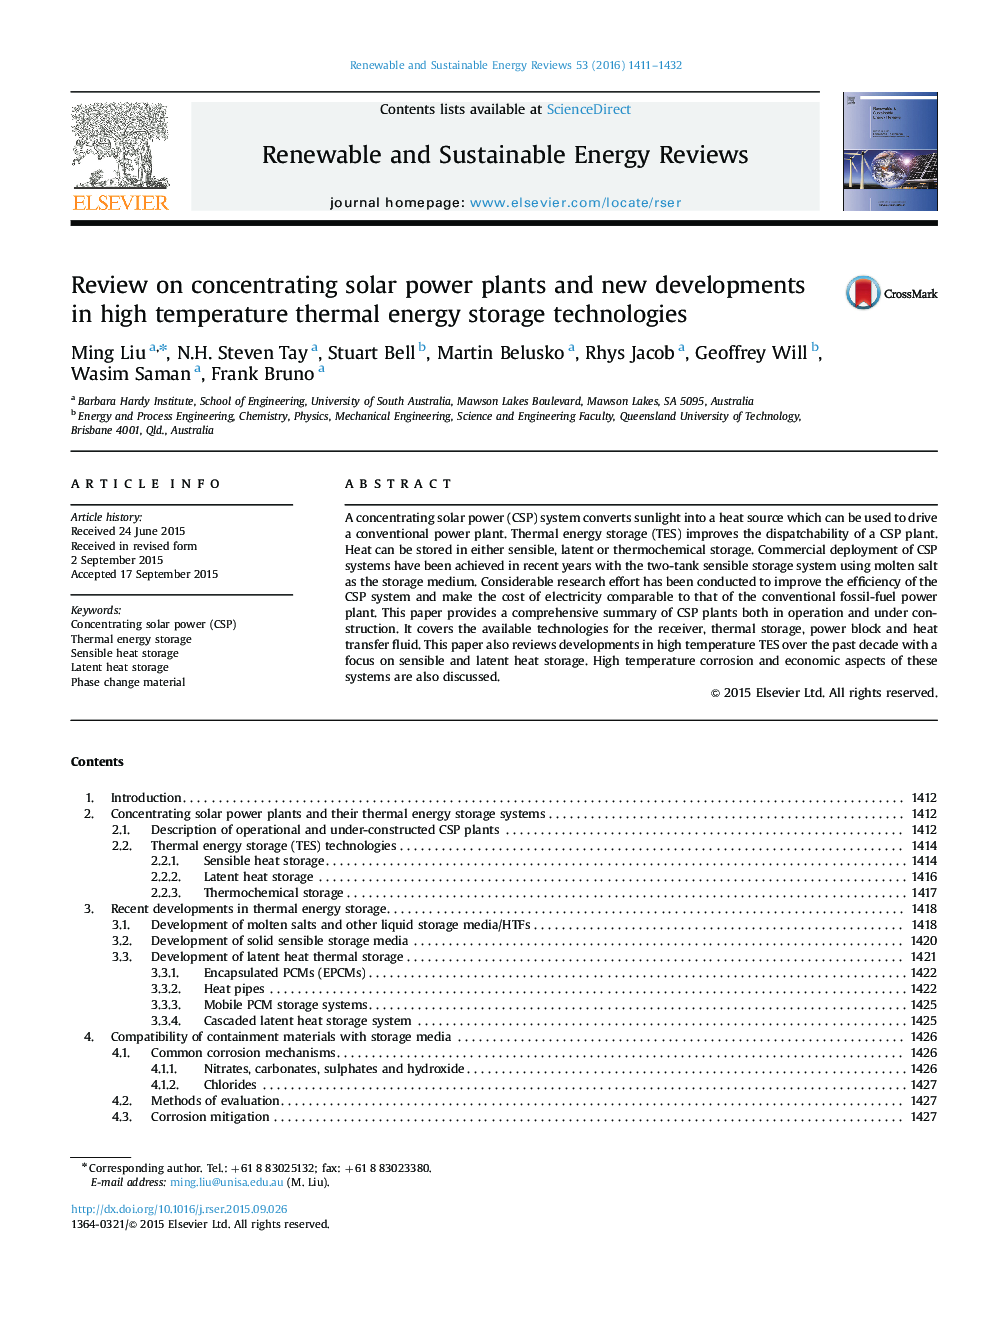 Review on concentrating solar power plants and new developments in high temperature thermal energy storage technologies